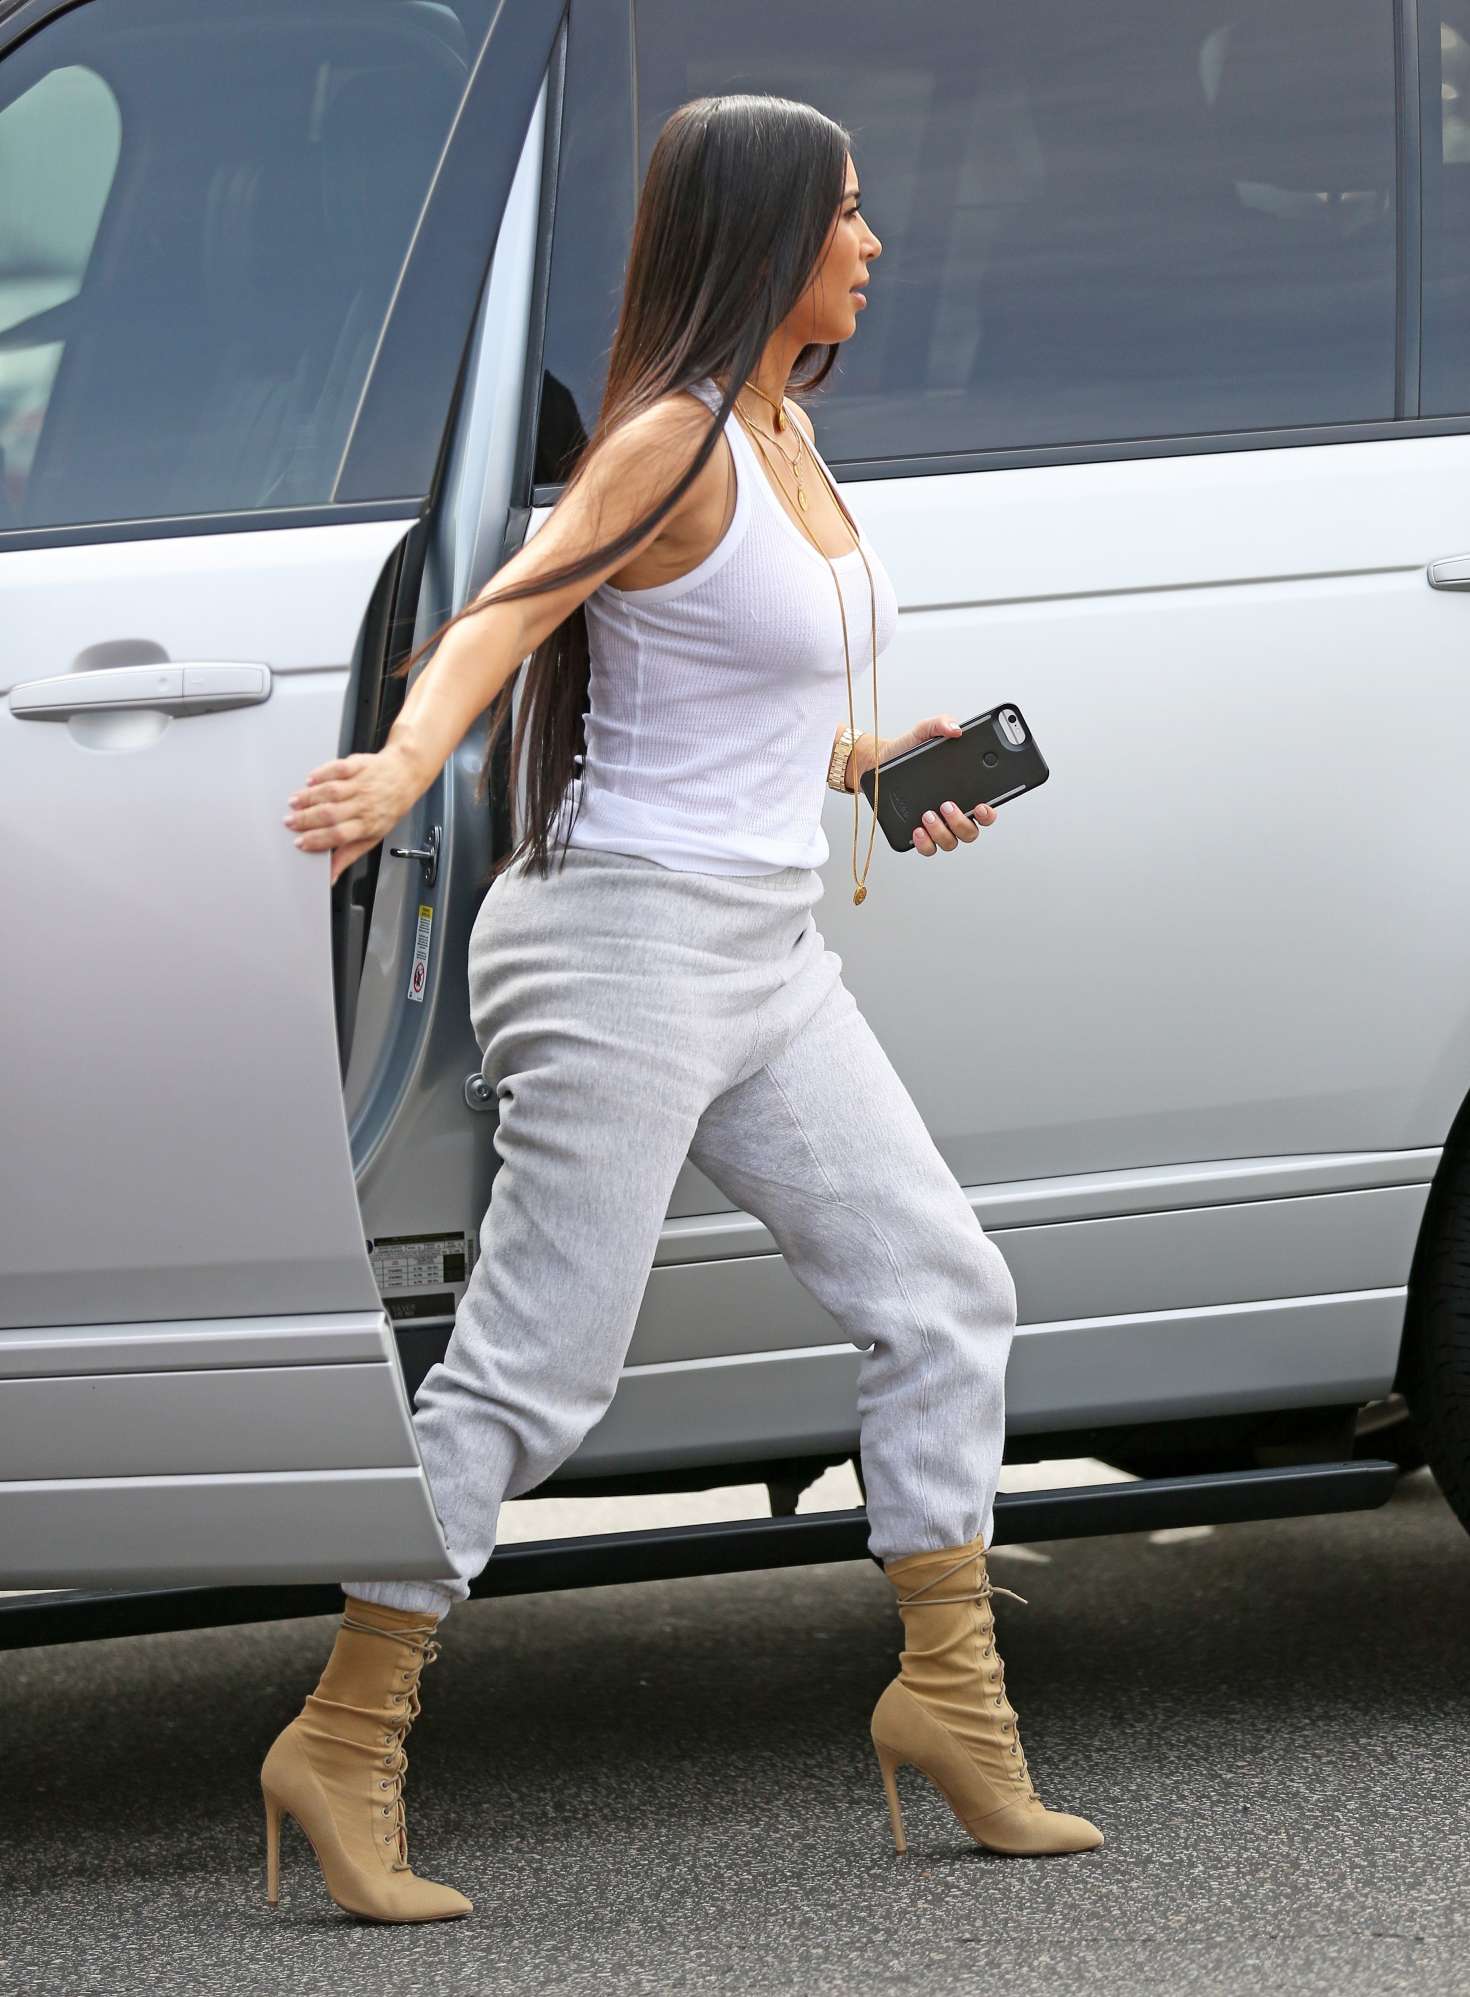 Kim Kardashian out and about in Calabasas